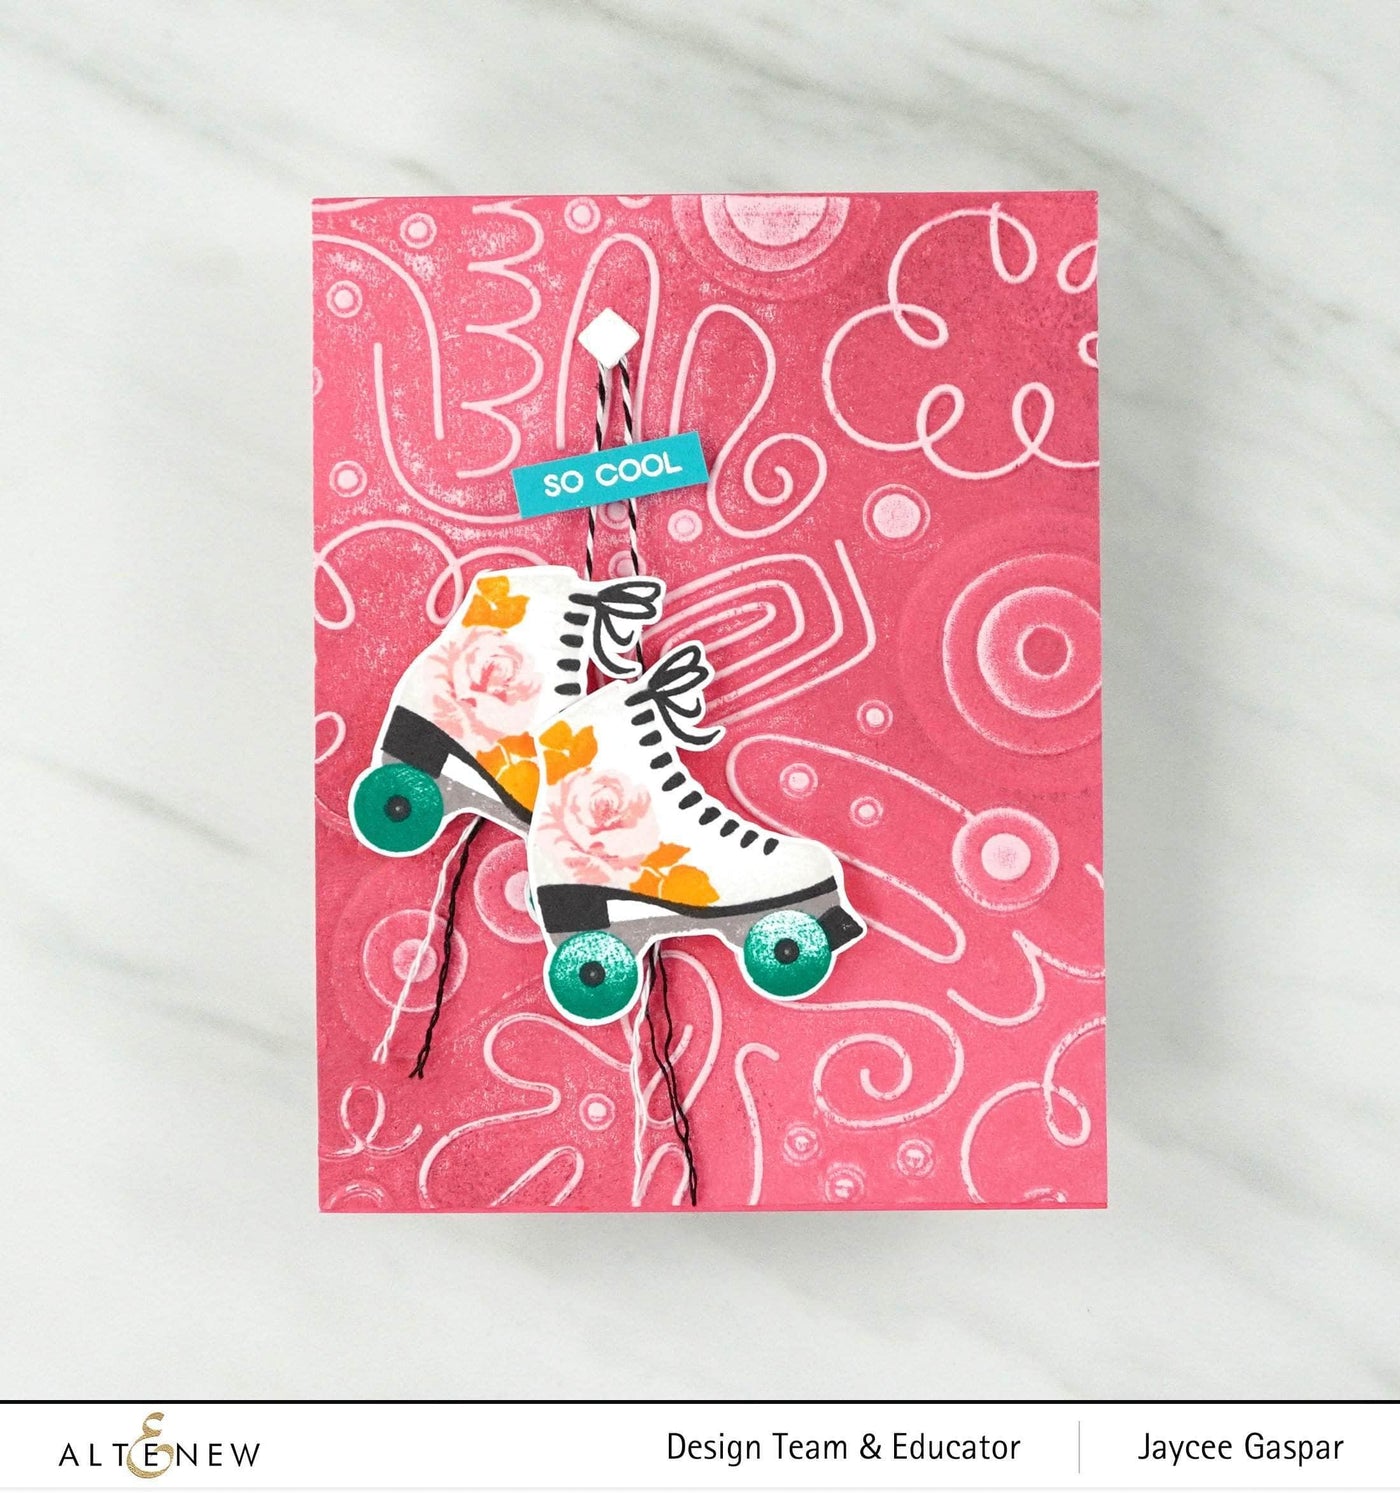 Clear Stamps Cool Decades Stamp Set